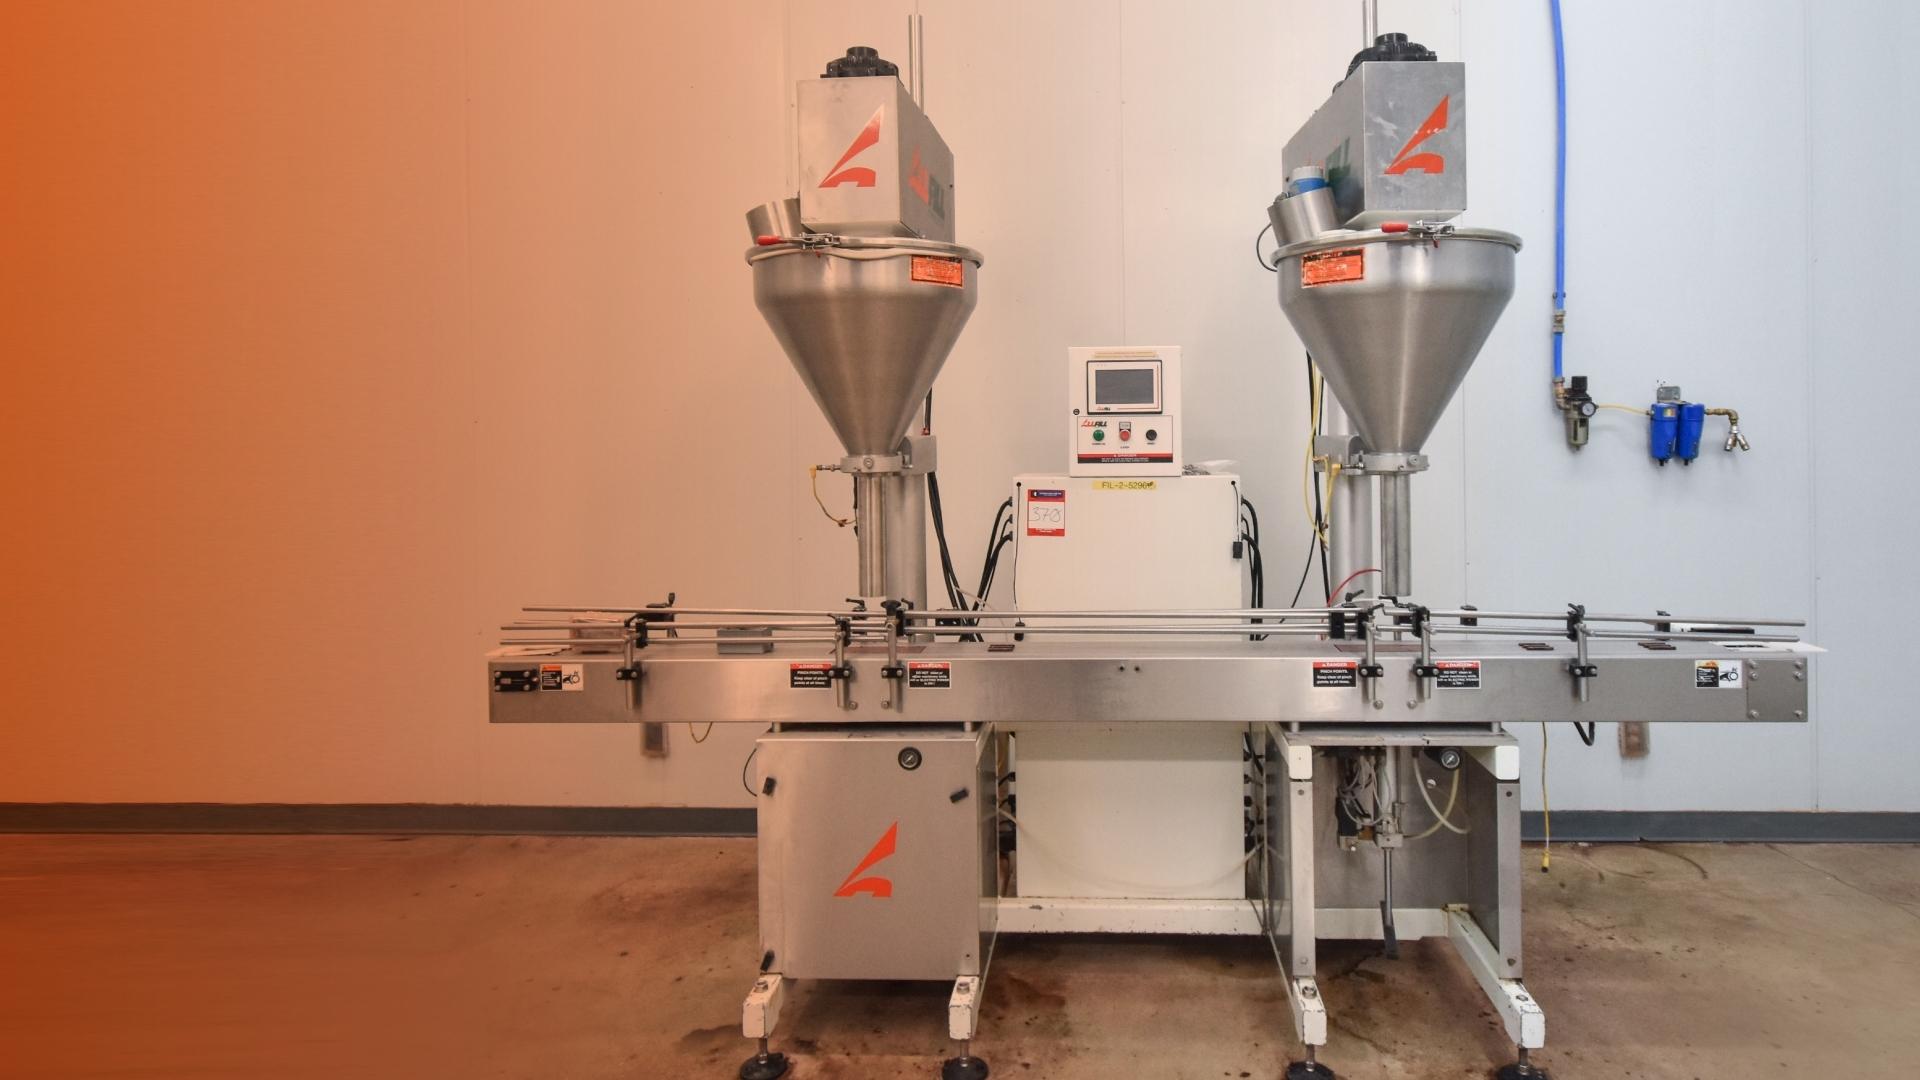 Supplement Manufacturing & Packaging Equipment Auction